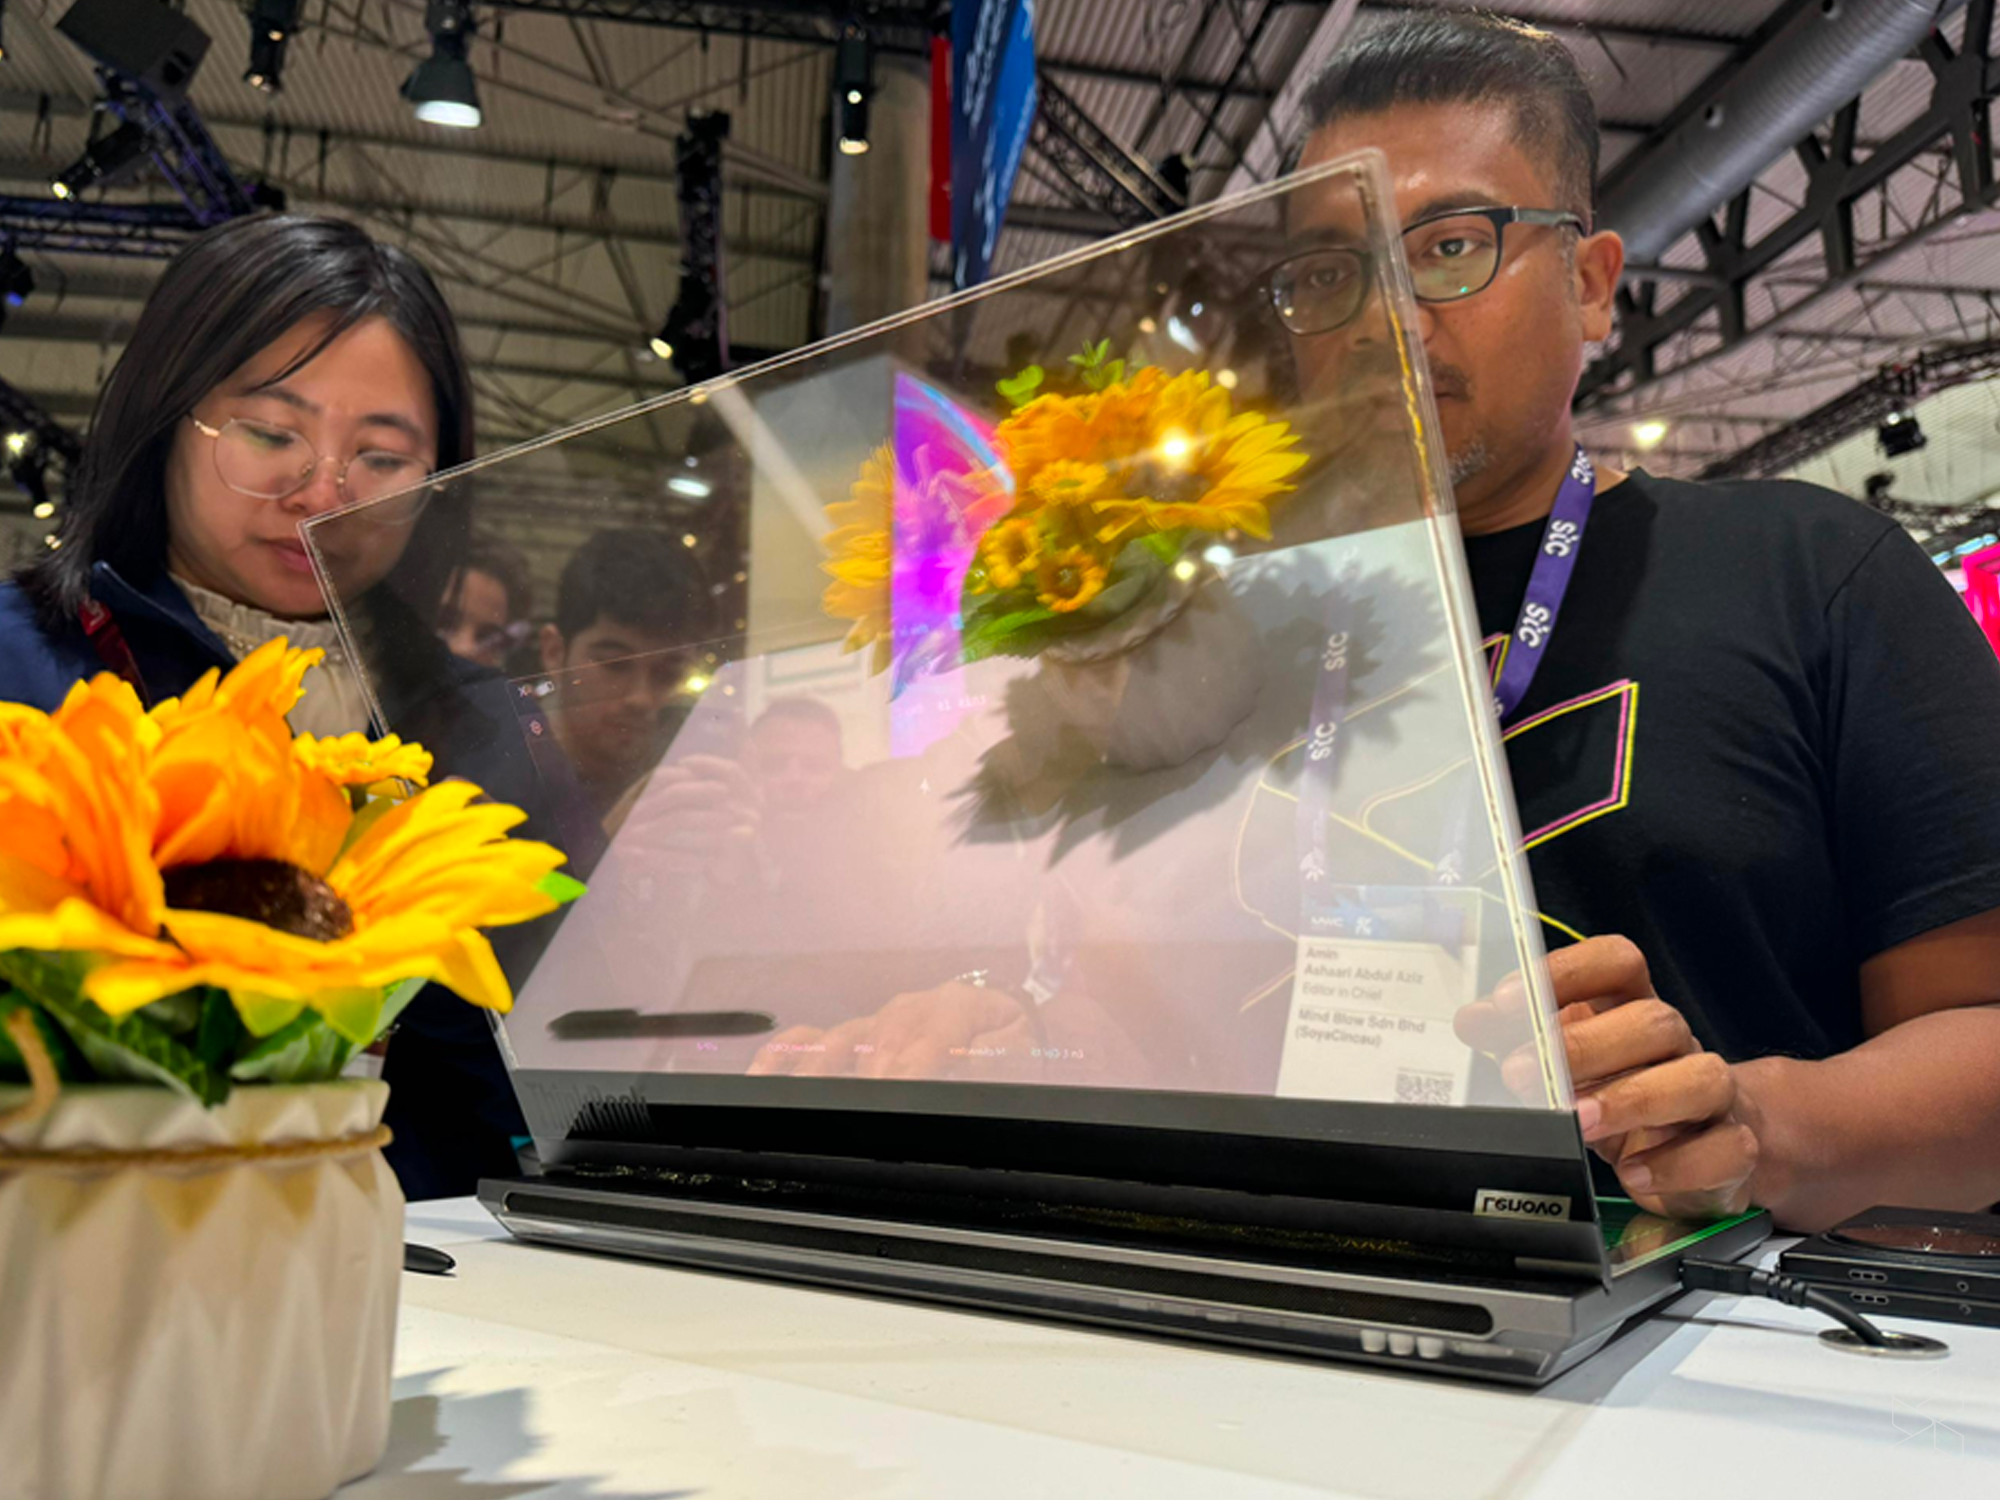 lenovo’s weird proof of concept laptop has a 17.3-inch, micro-led transparent display